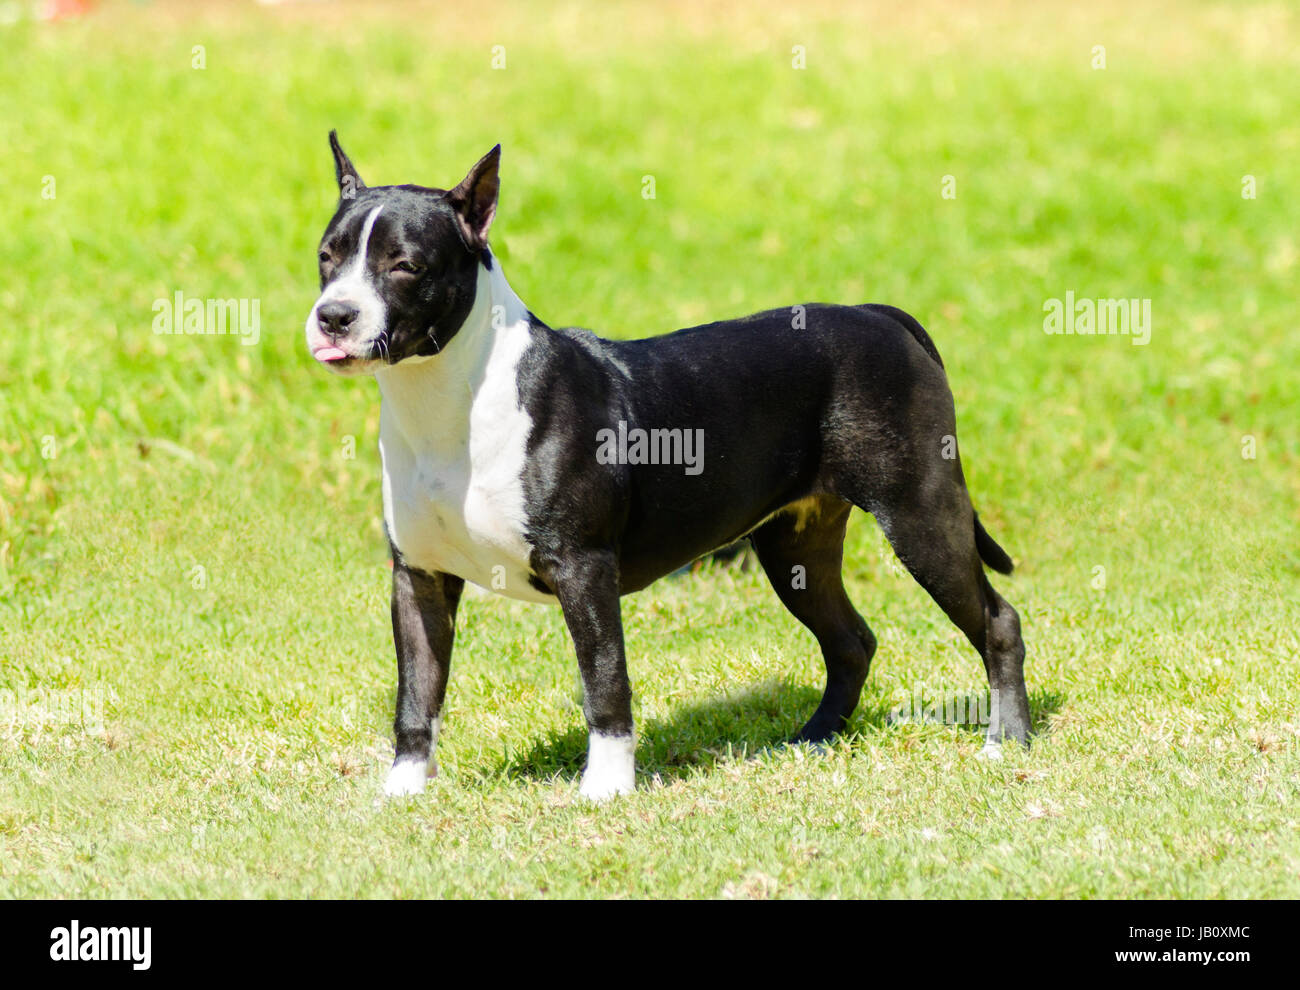 A small, young, beautiful, black and white American Staffordshire Terrier standing on the grass while playfully sticking its tongue out looking like it is mocking someone. Its ears are cropped. Stock Photo